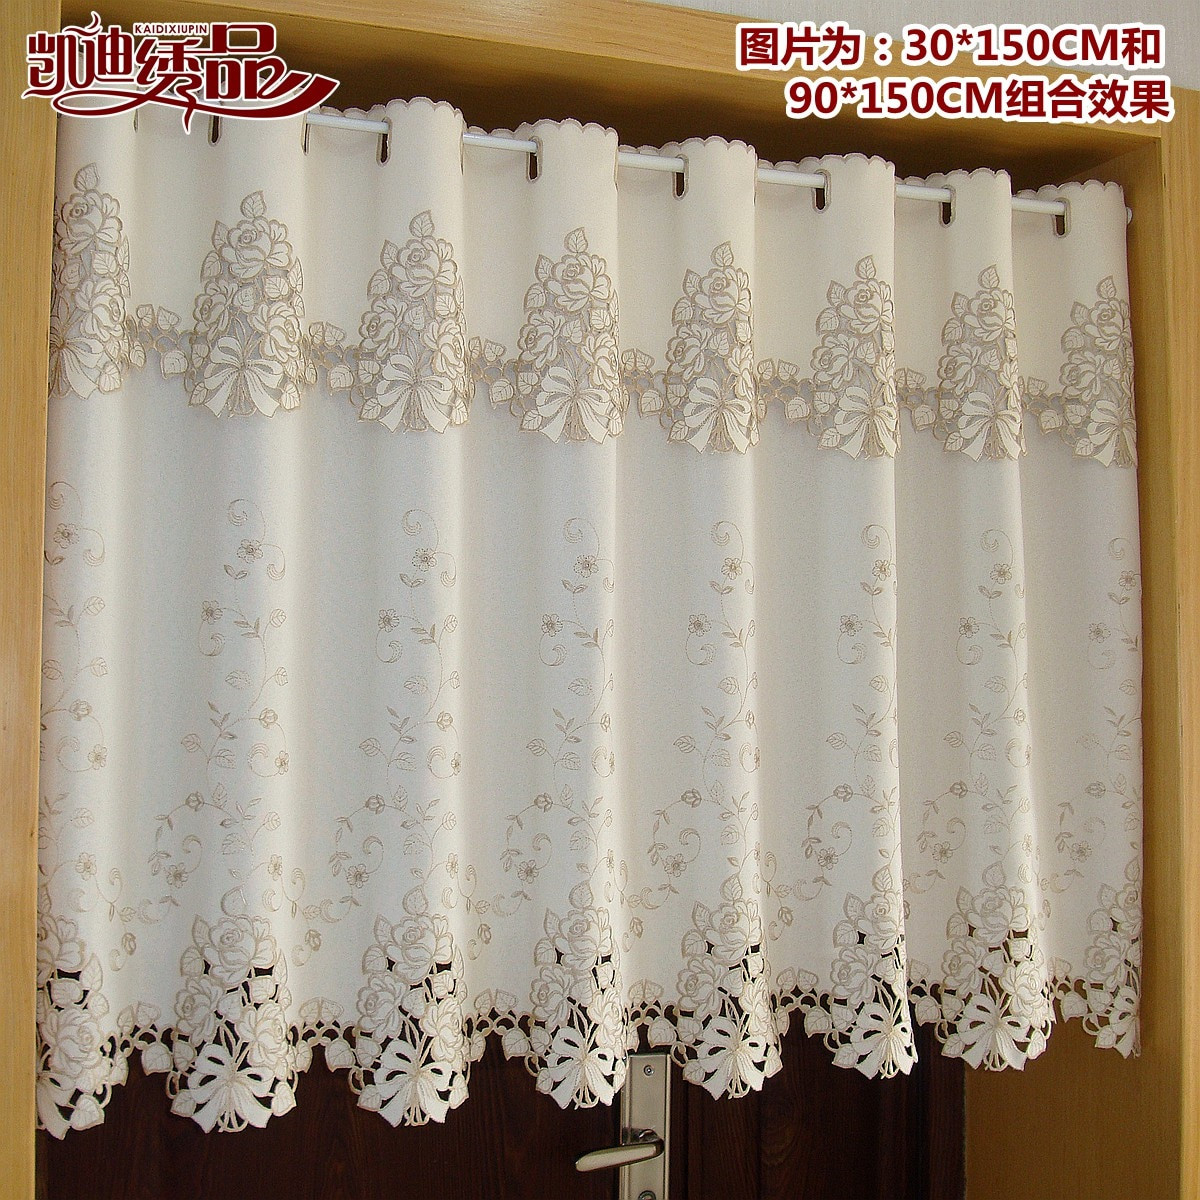 Fabric For Kitchen Curtain
 Quality tube curtain embroidery fabric curtain finished